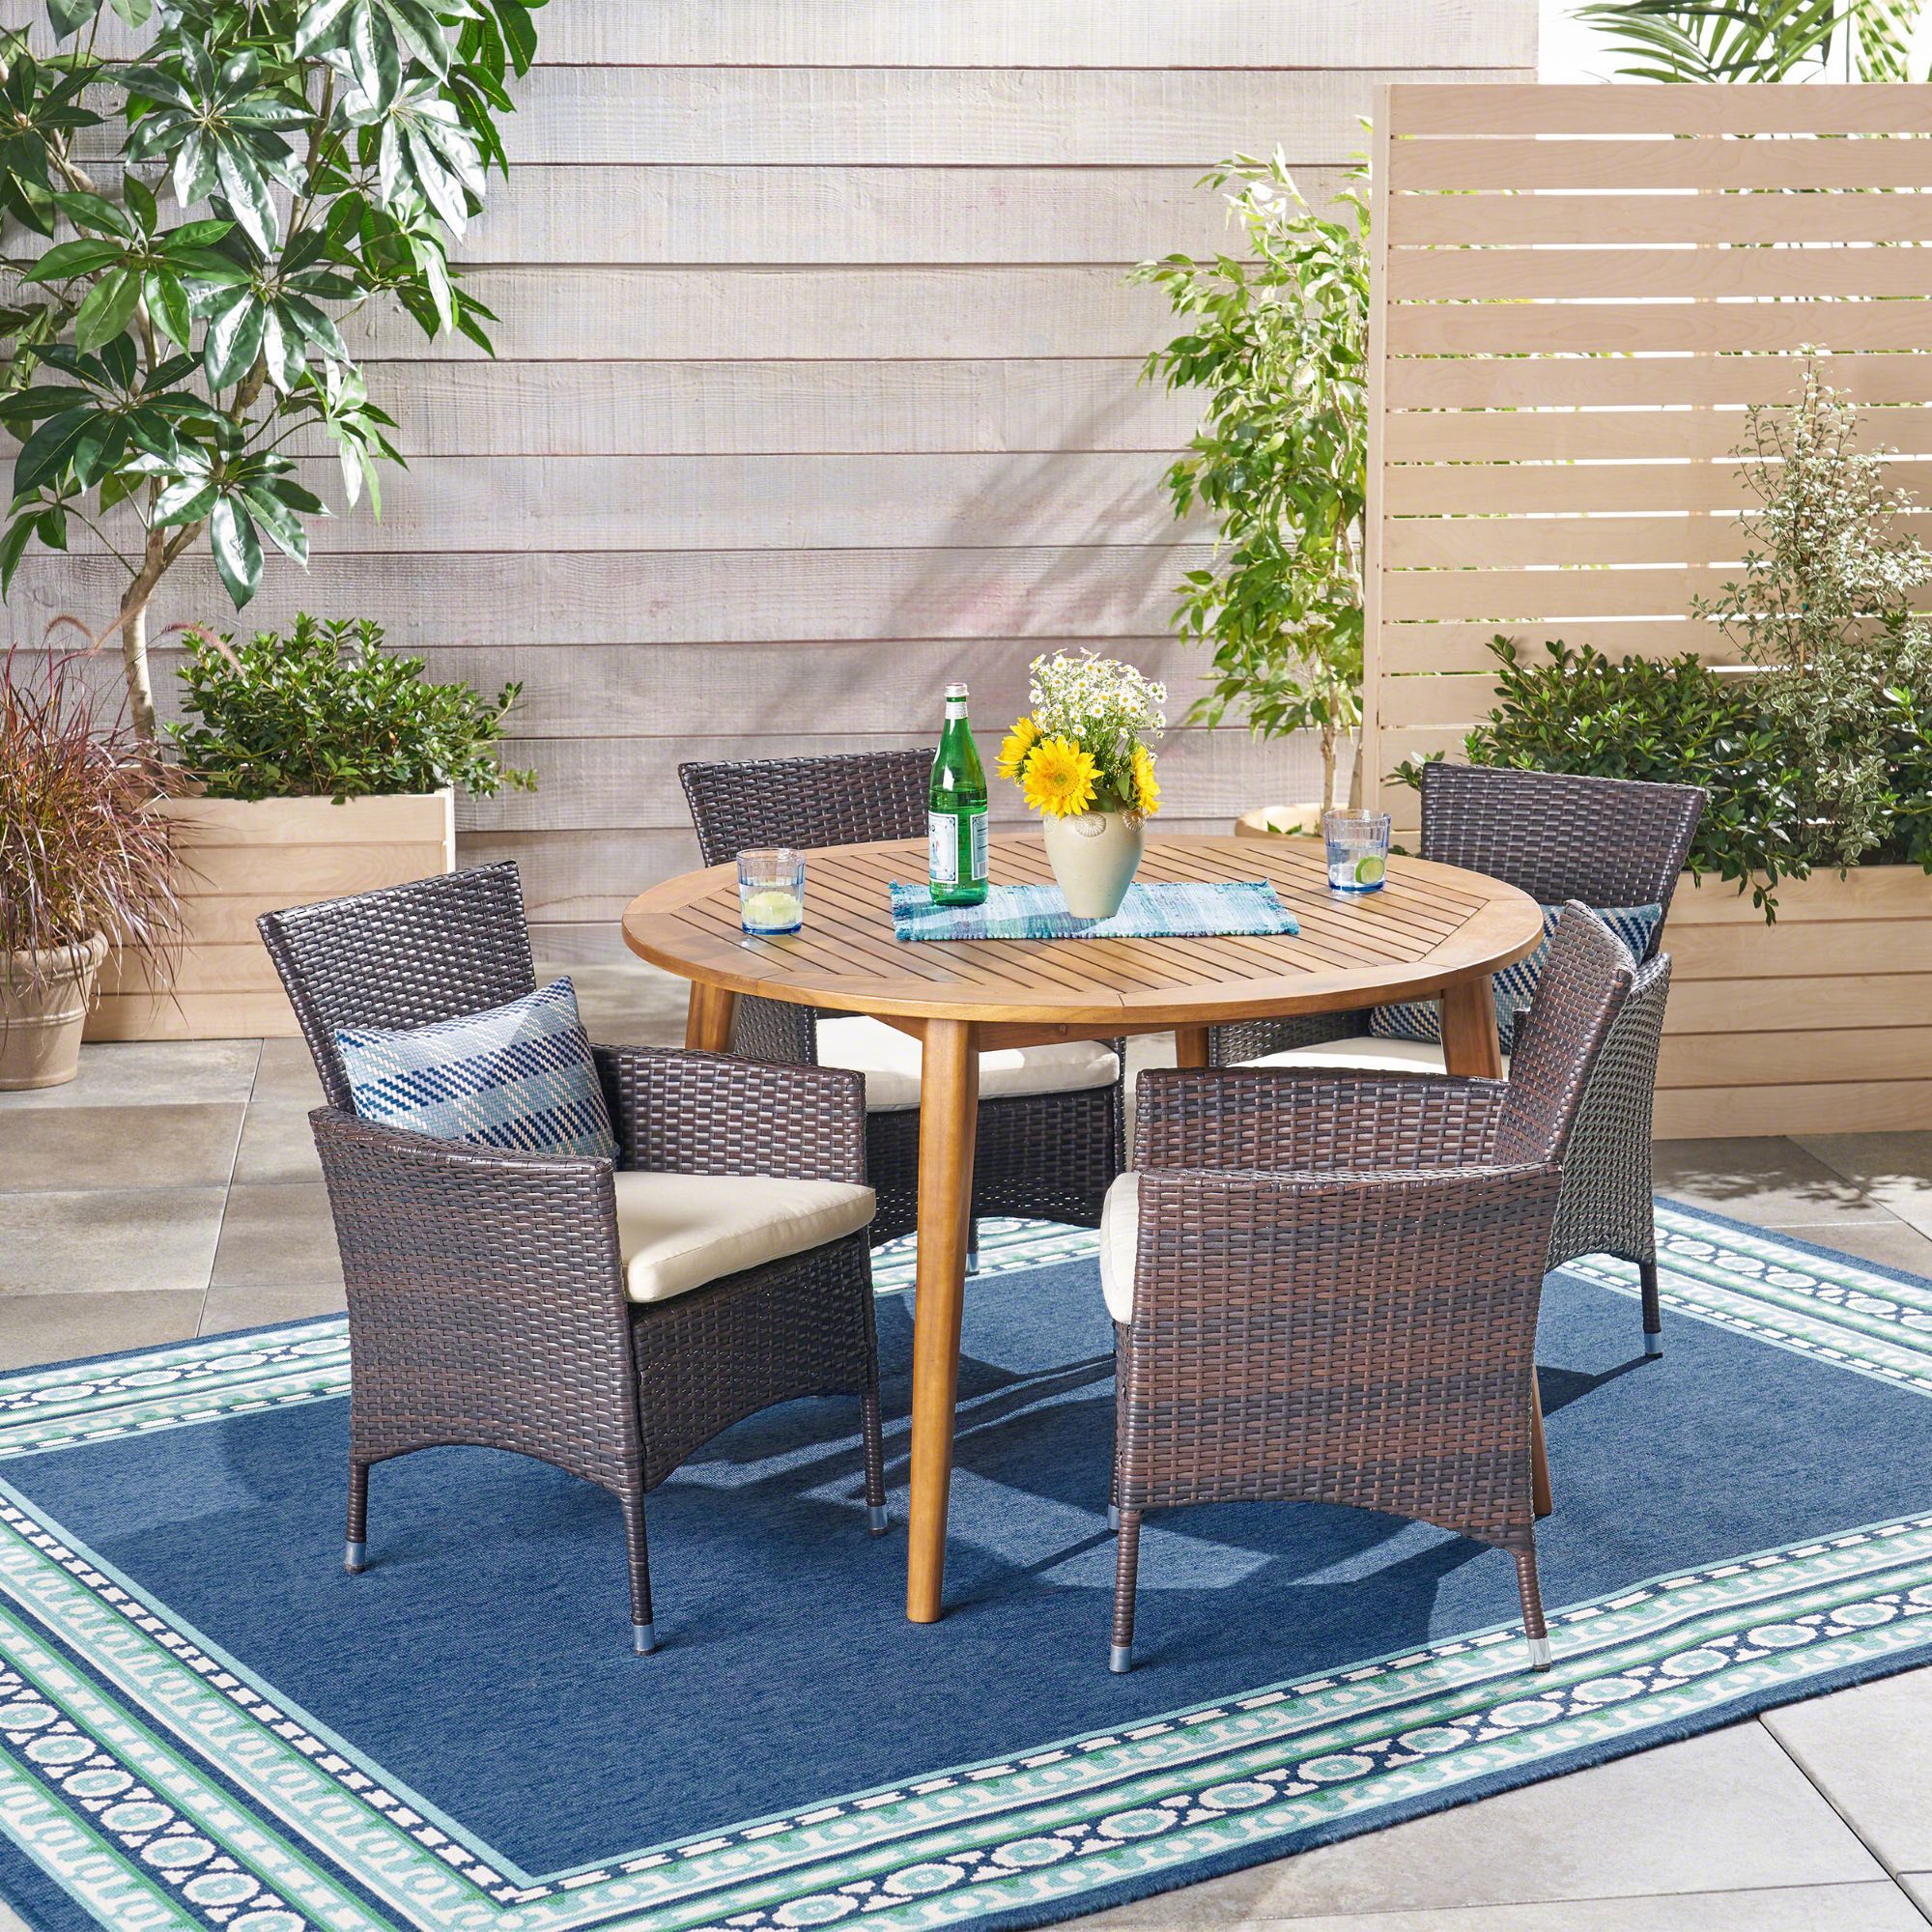 5 Piece Brown Wicker Finish Round Outdoor Furniture Patio Dining Set Within 5 Piece Round Patio Dining Sets (View 3 of 15)